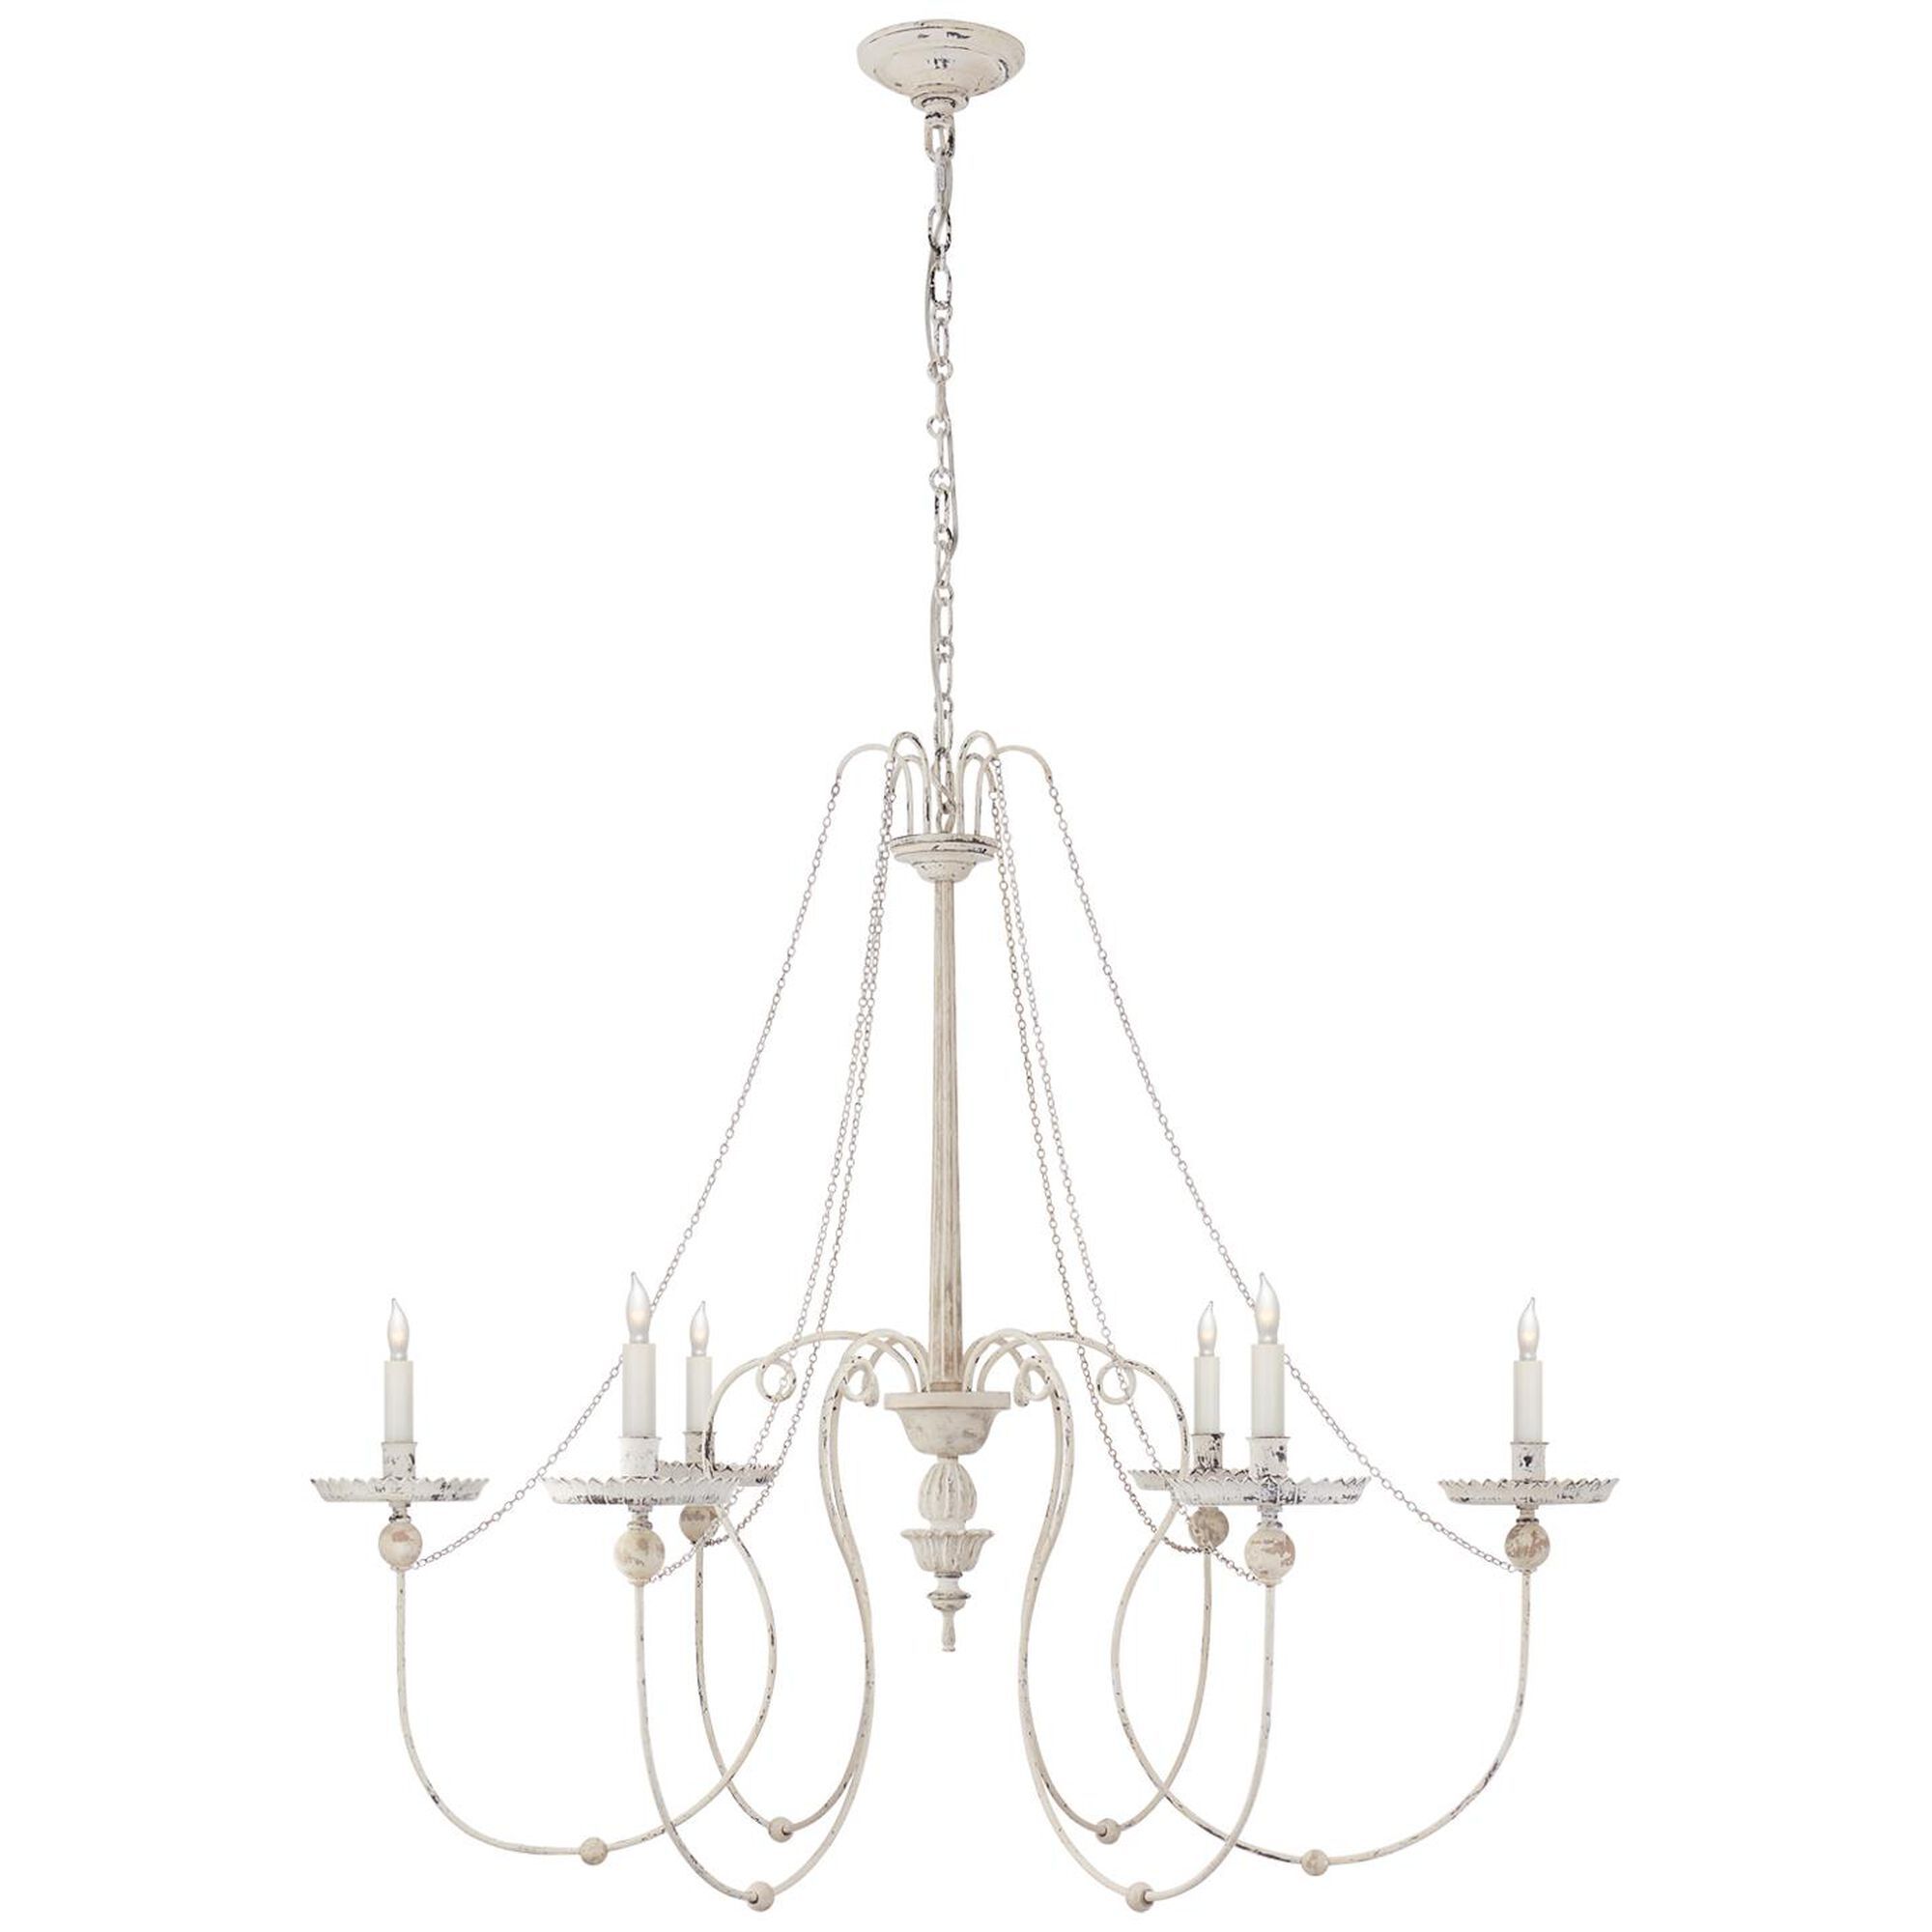 E. F. Chapman Umbria 42 Inch 6 Light Chandelier by Visual Comfort and Co. | Capitol Lighting 1800lighting.com